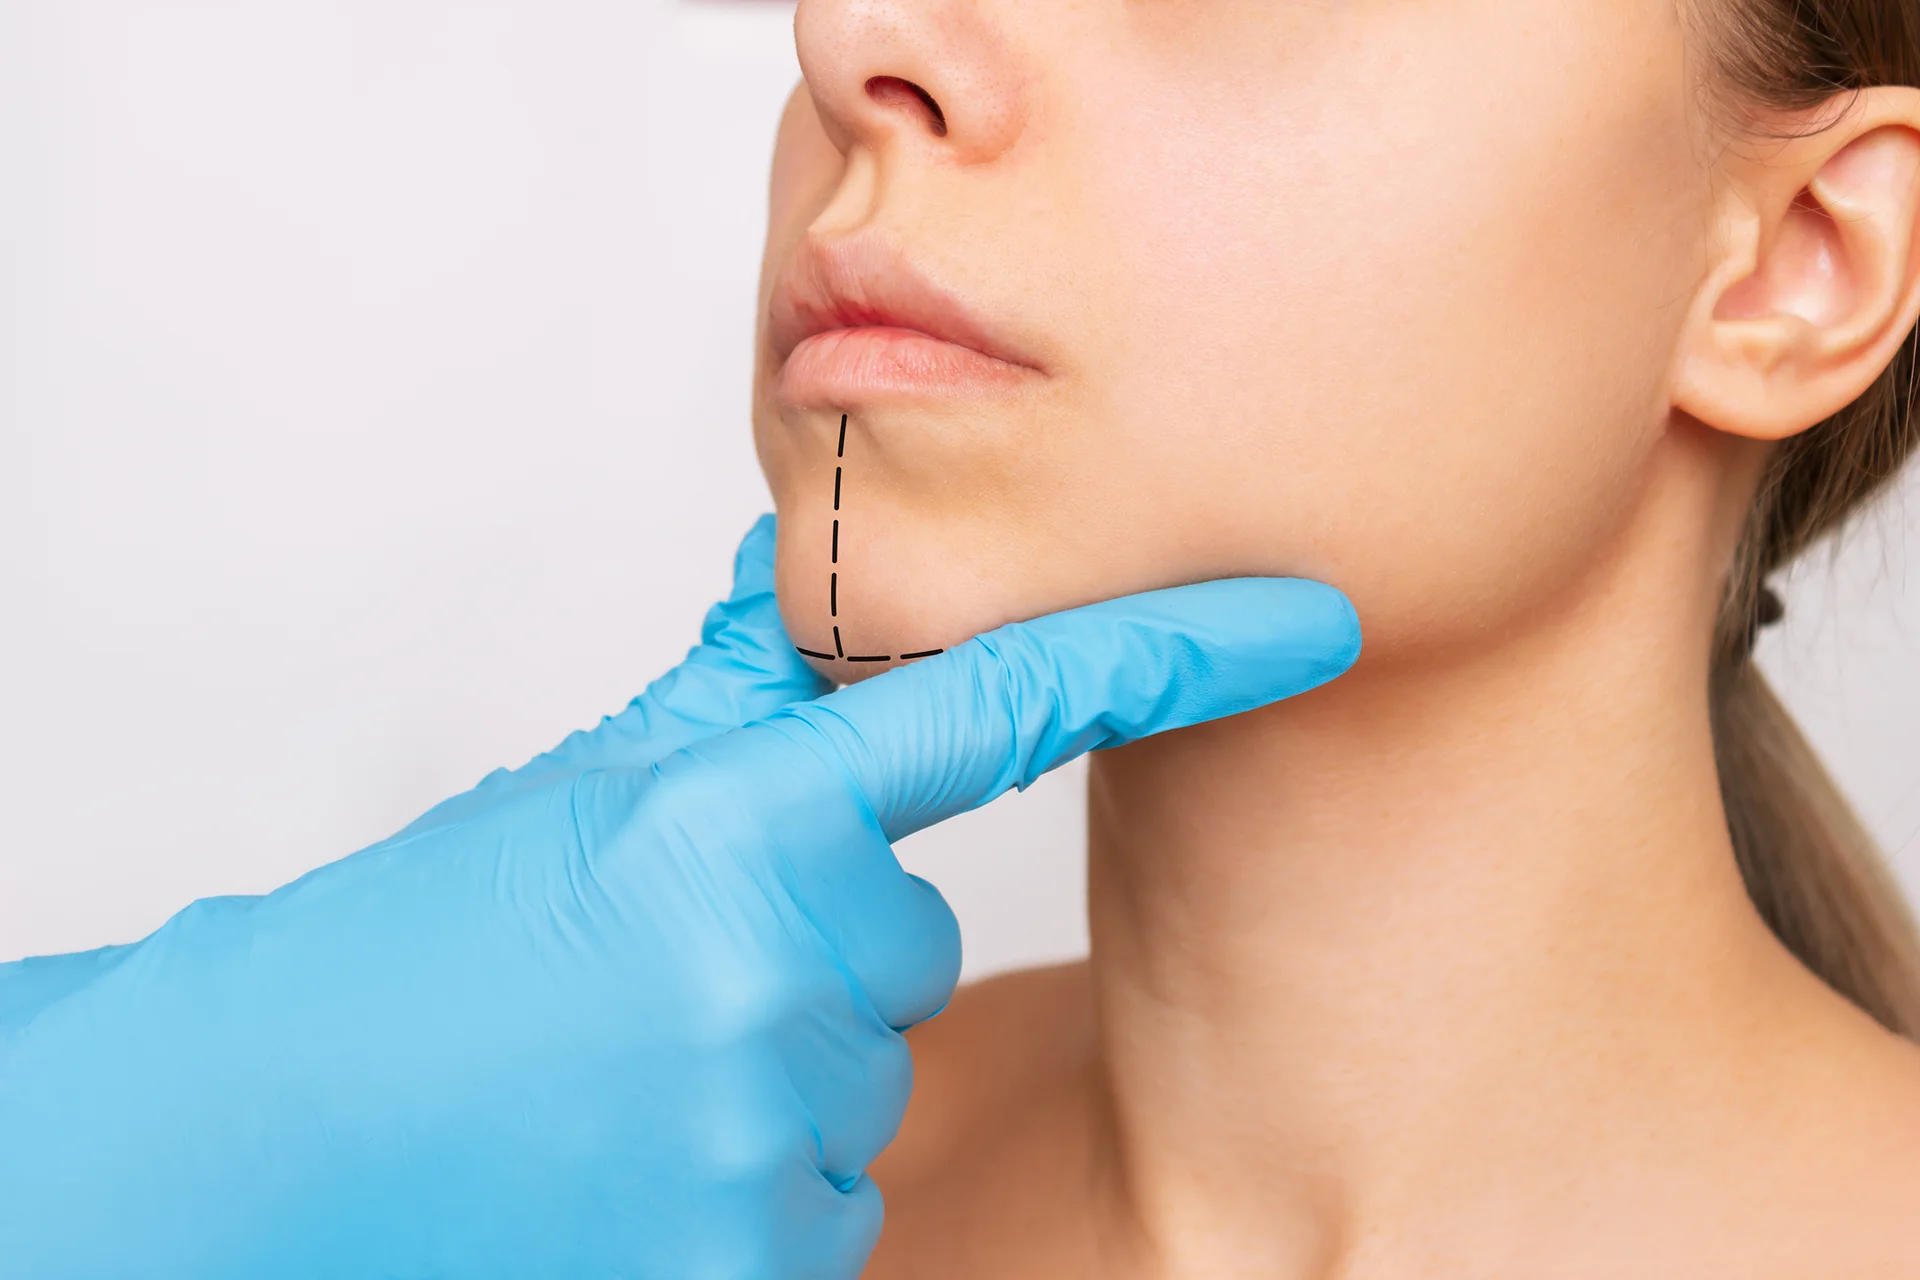 A woman's face undergoes a needle piercing during chin liposuction, highlighting the importance of taking appropriate steps and avoiding mishaps.